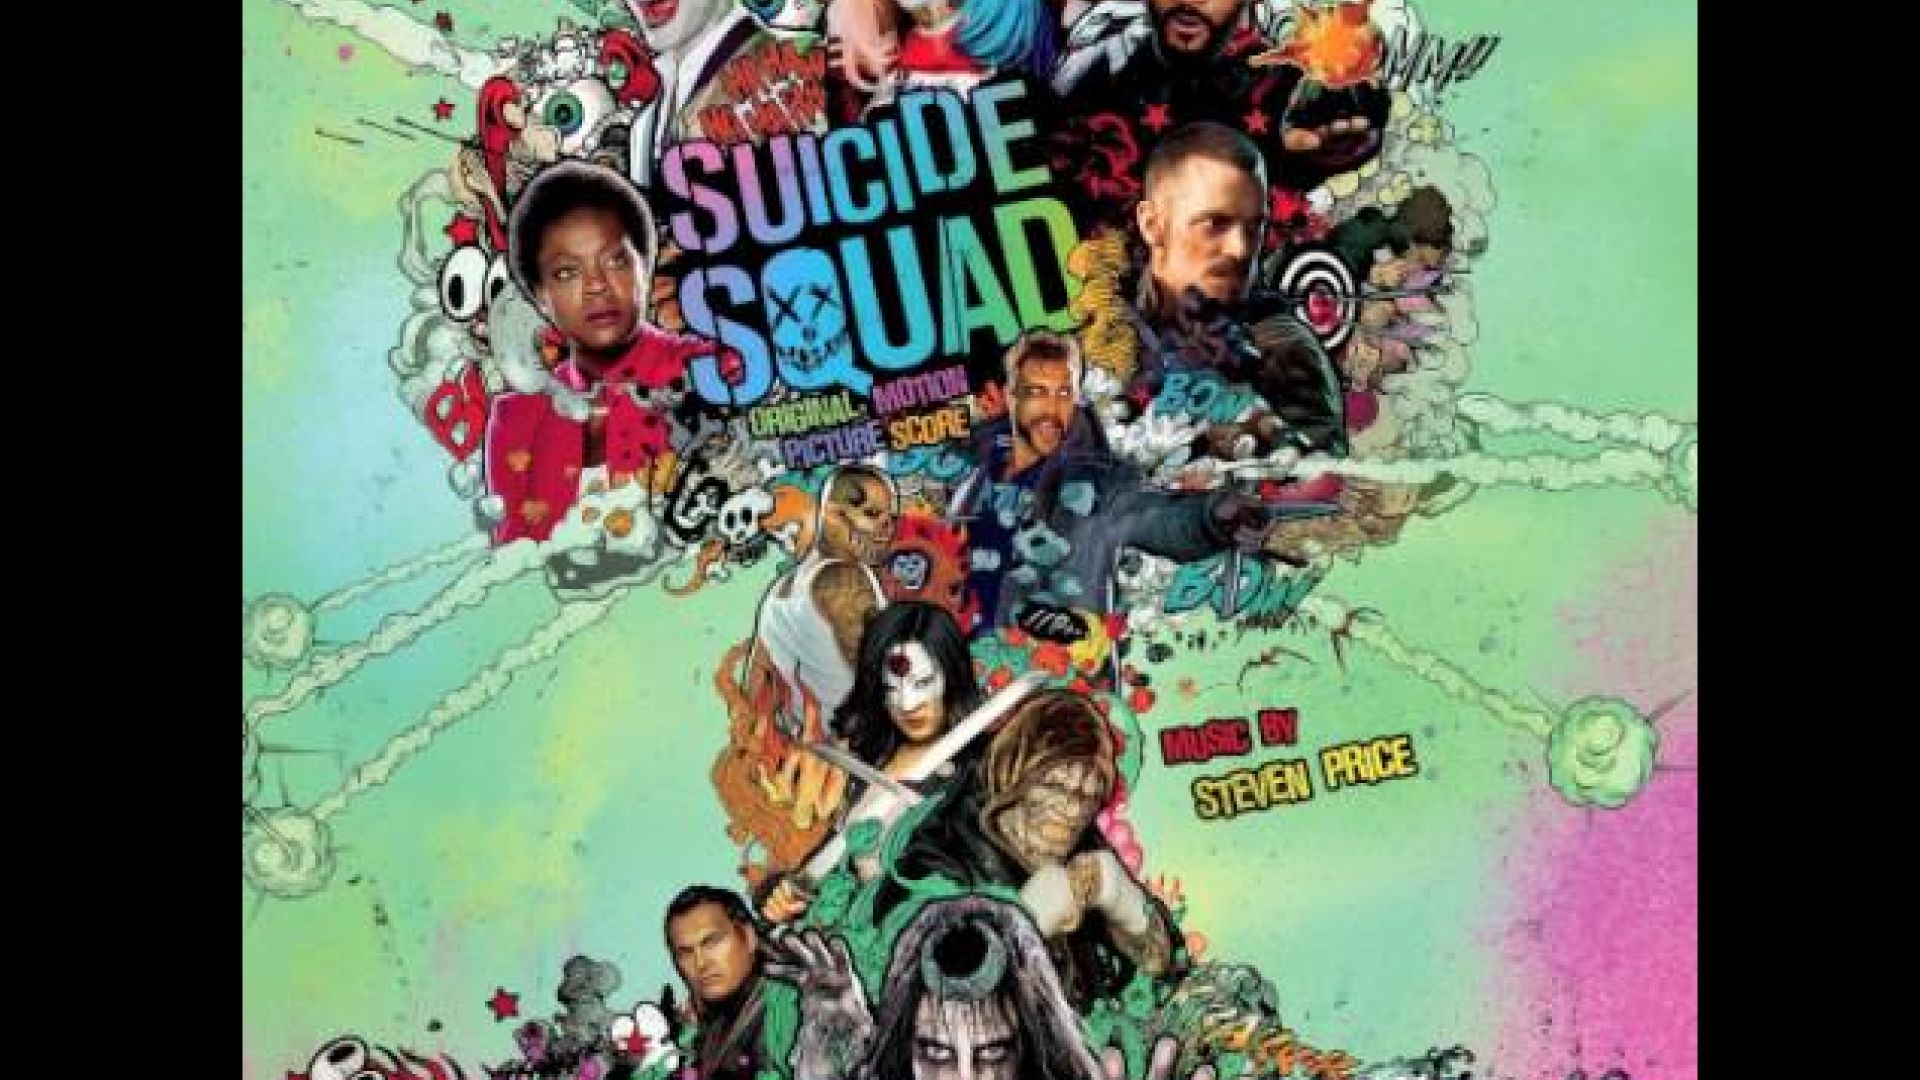 Check out the first track from the &#039;Suicide Squad&#039; soundtrac